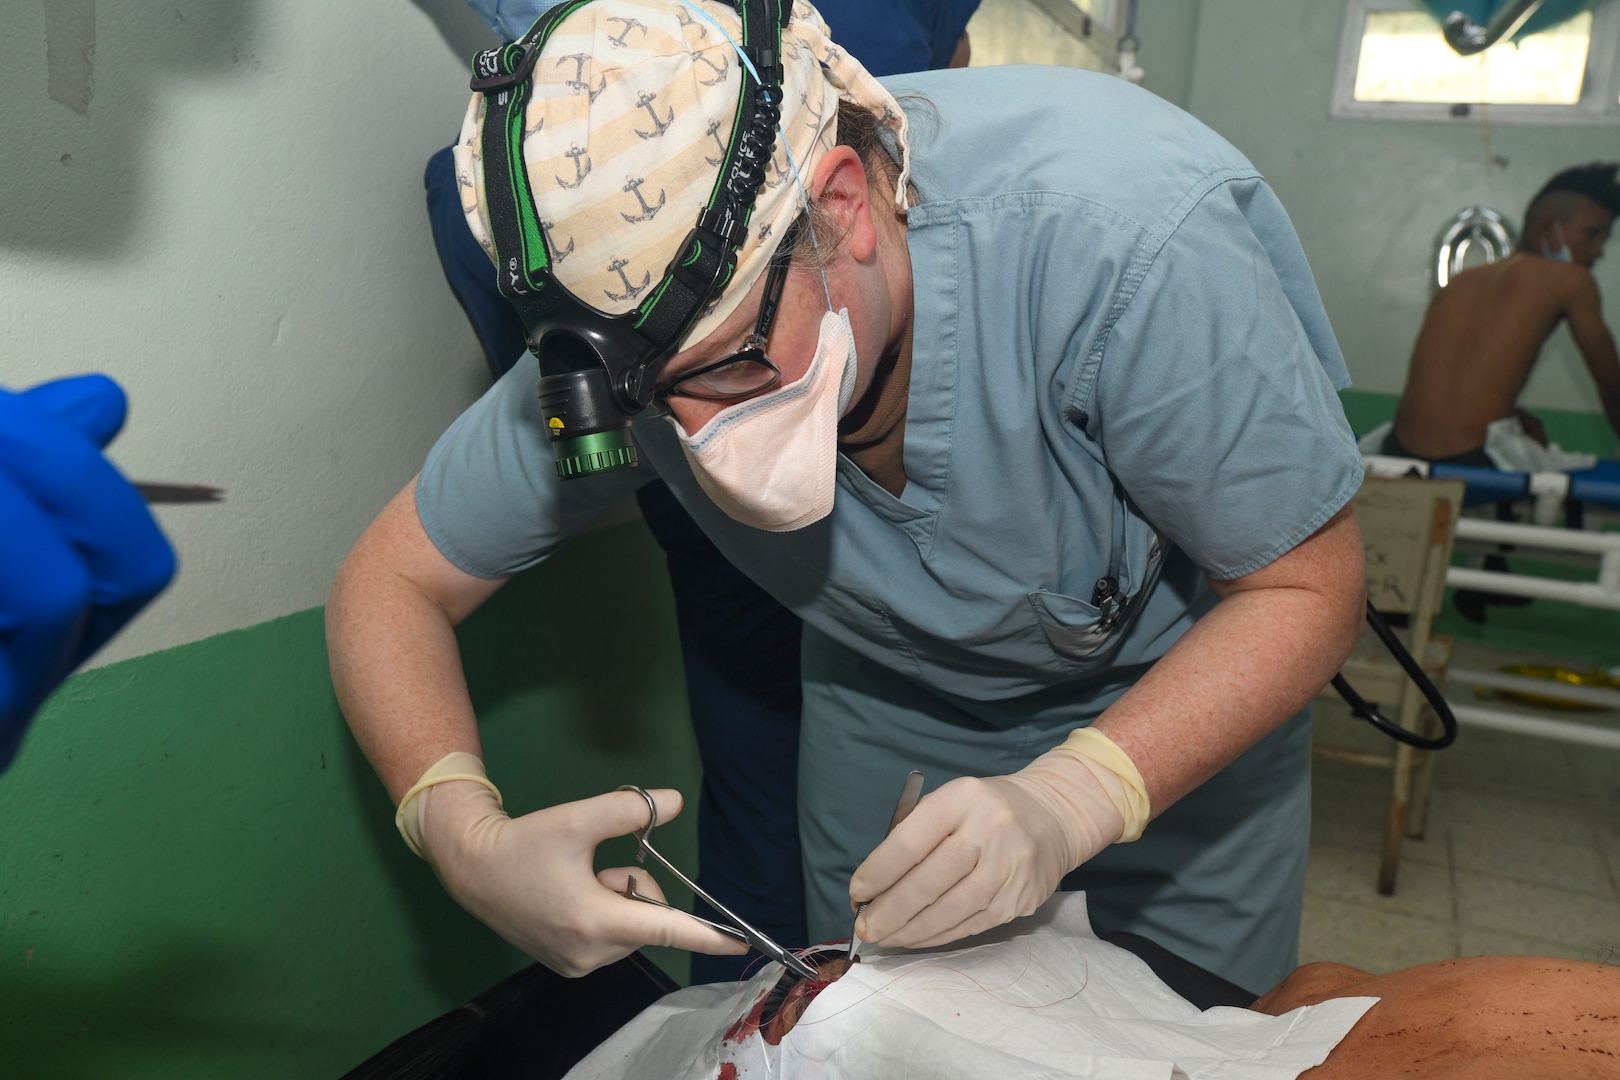 240227-N-FB730-1121 SAN PEDRO SULA, HONDURAS (Feb. 27, 2024) Capt. Jamie Fitch, a general surgeon with Expeditionary Resuscitative Surgical System (ERSS) 11 from Navy Medicine Readiness and Training Command Camp Lejeune, sutures a head laceration in the trauma bay at Hospital Nacional Mario Catarino Rivas, San Pedro Sula, Honduras on Feb. 27, 2024. In collaboration with joint forces and the host nation, Expeditionary Medical Unit 10 G conducted its first Global Health Engagement in Honduras enhances expeditionary core skills and exchanges knowledge with Honduran healthcare professionals in a limited resource environment. (U.S. Navy photo by Mass Communication Specialist 2nd Class Justin Woods)